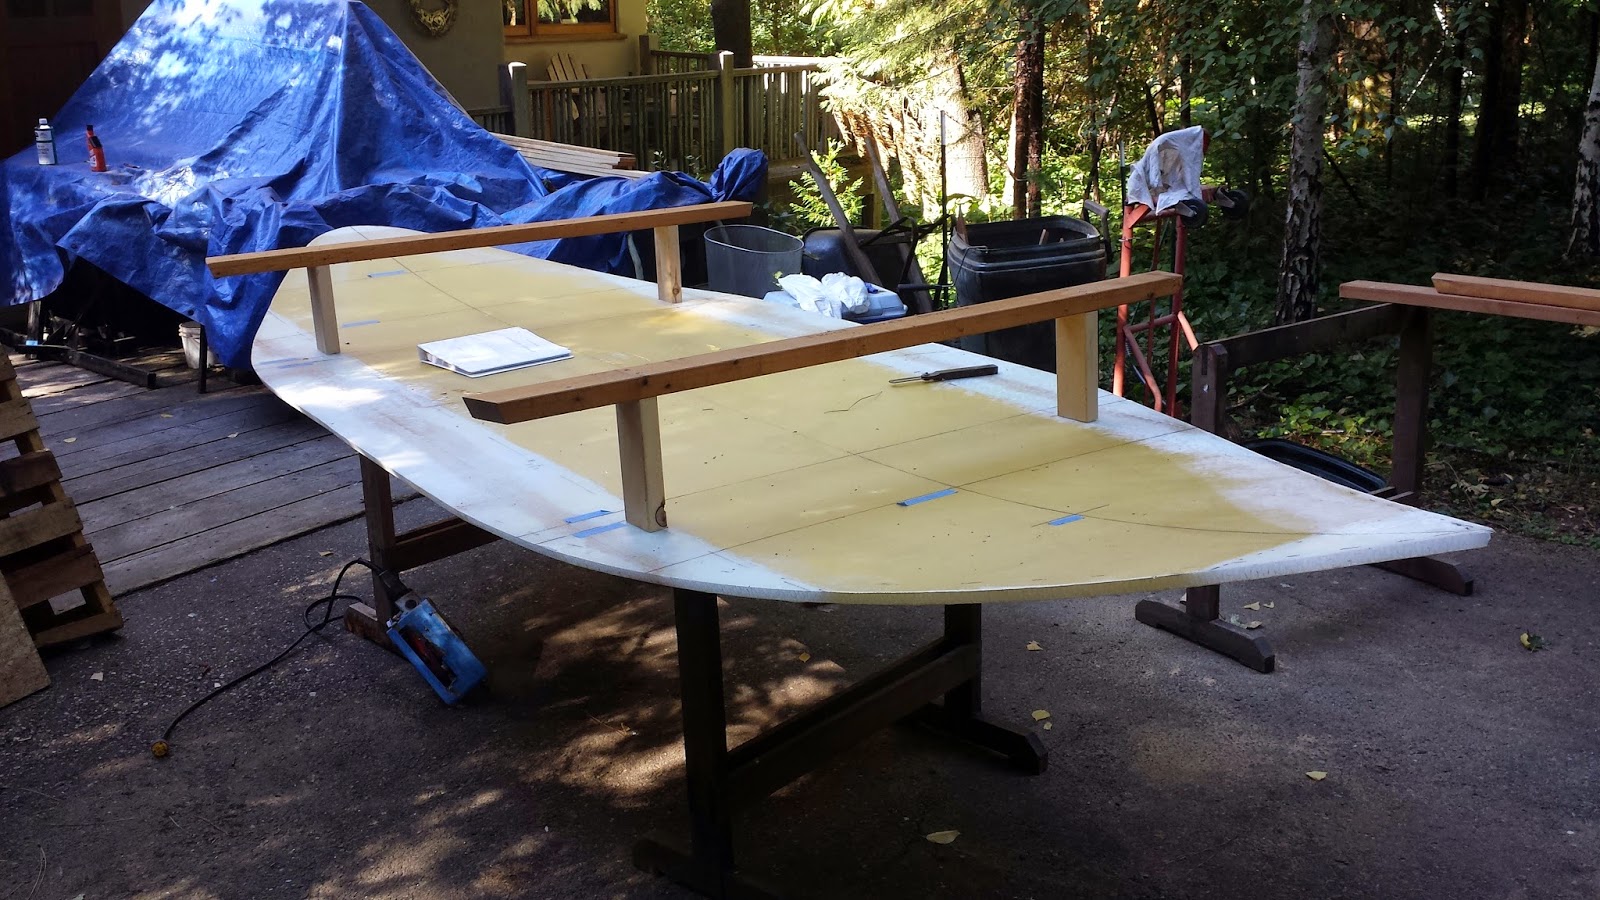  Kingfisher Drift Boat Build - Preparing to Stitch the Panels Together